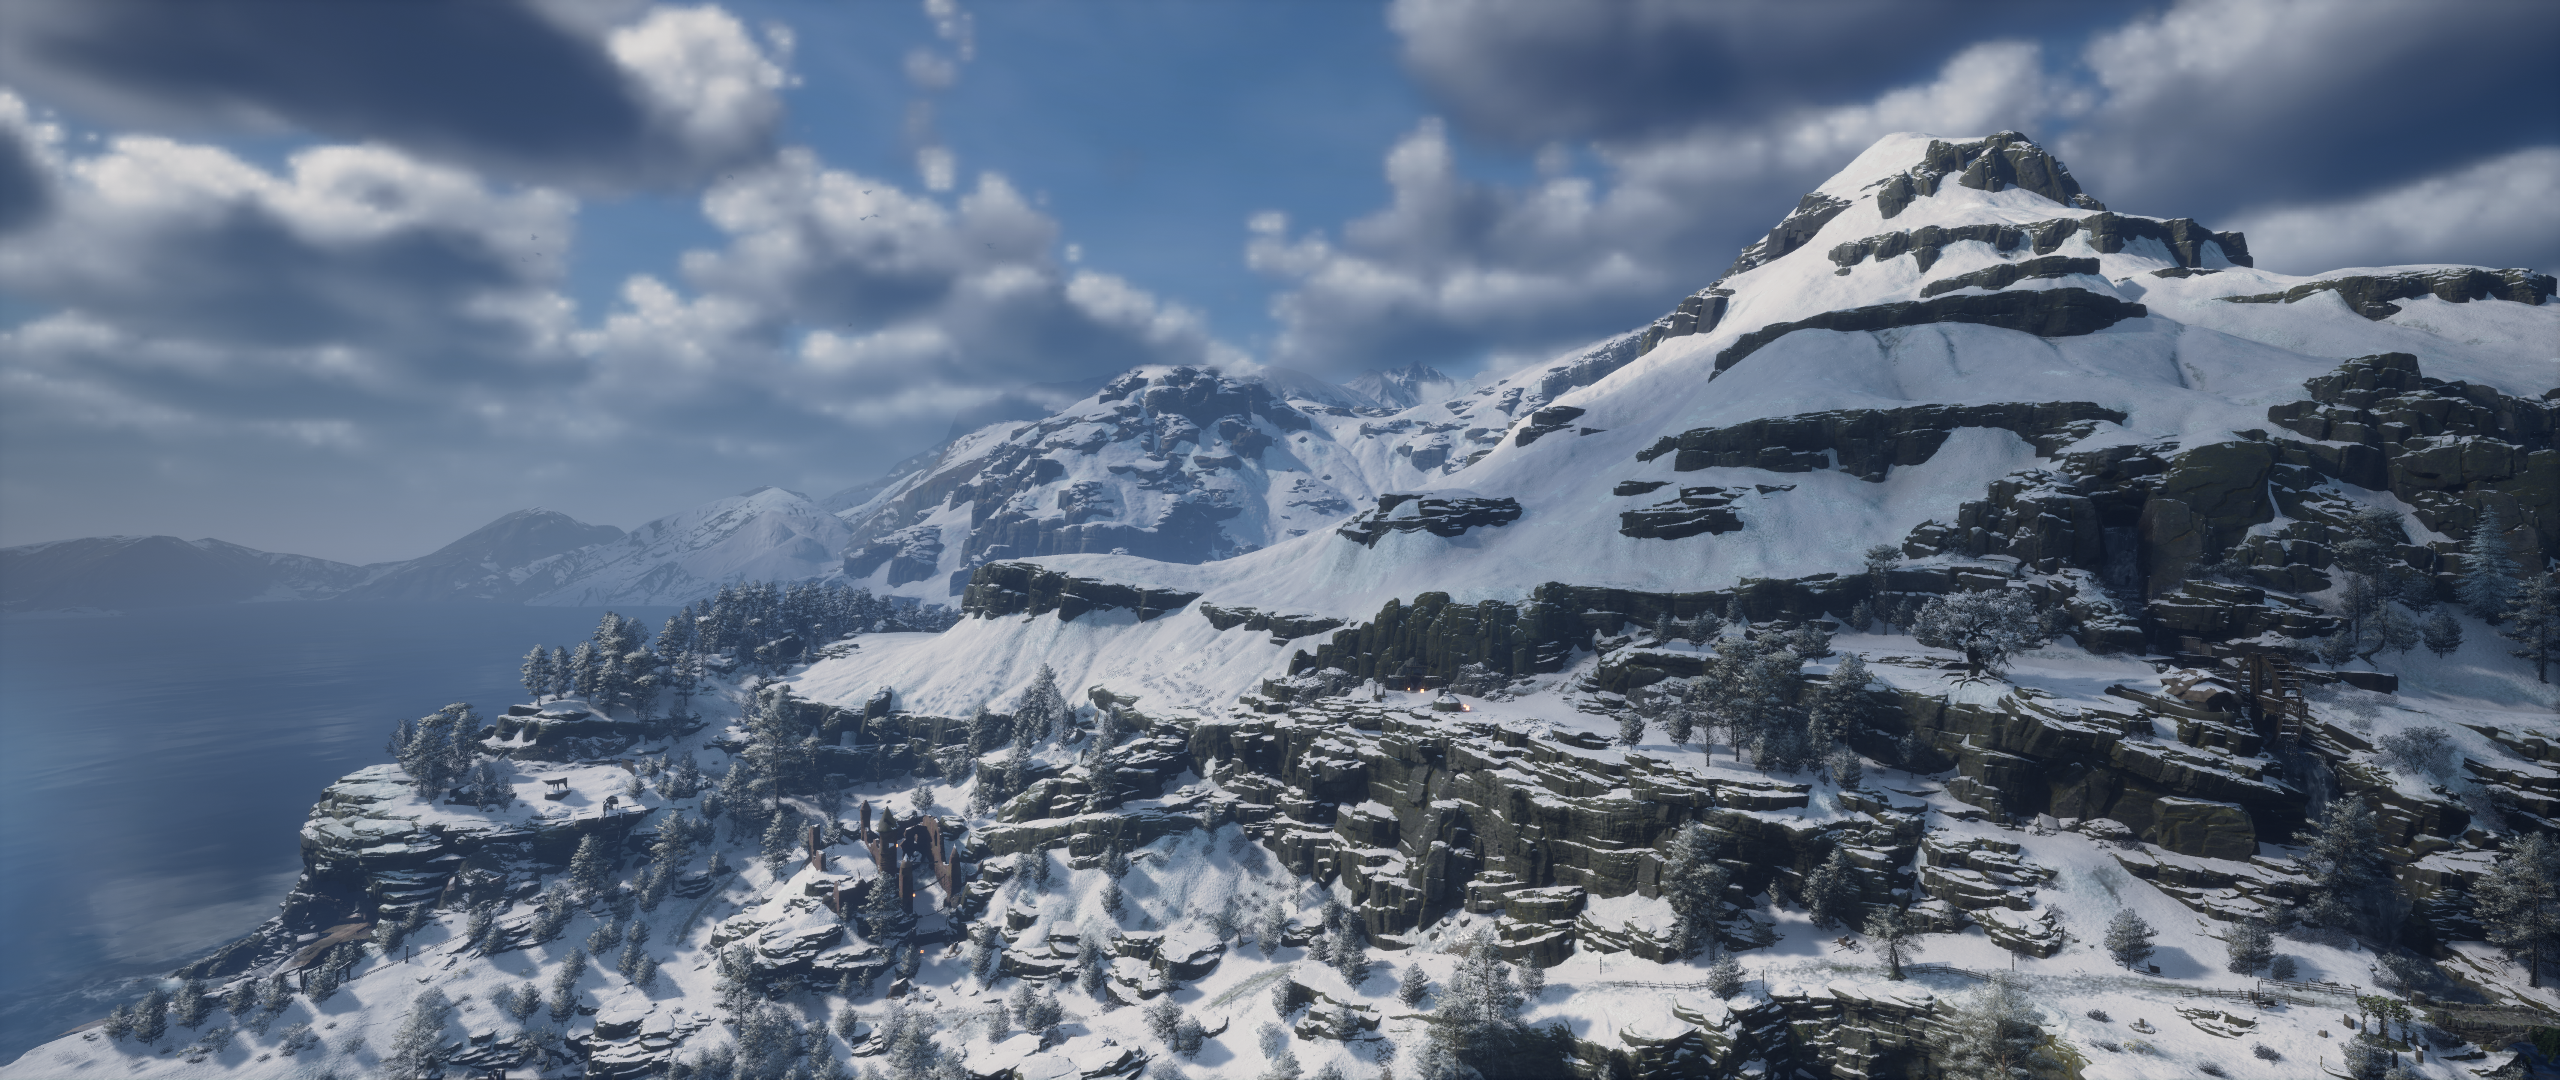 Hogwarts Hogwarts Legacy Harry Potter PC Gaming Landscape Screen Shot Avalanche Software Snow Clouds 2560x1080